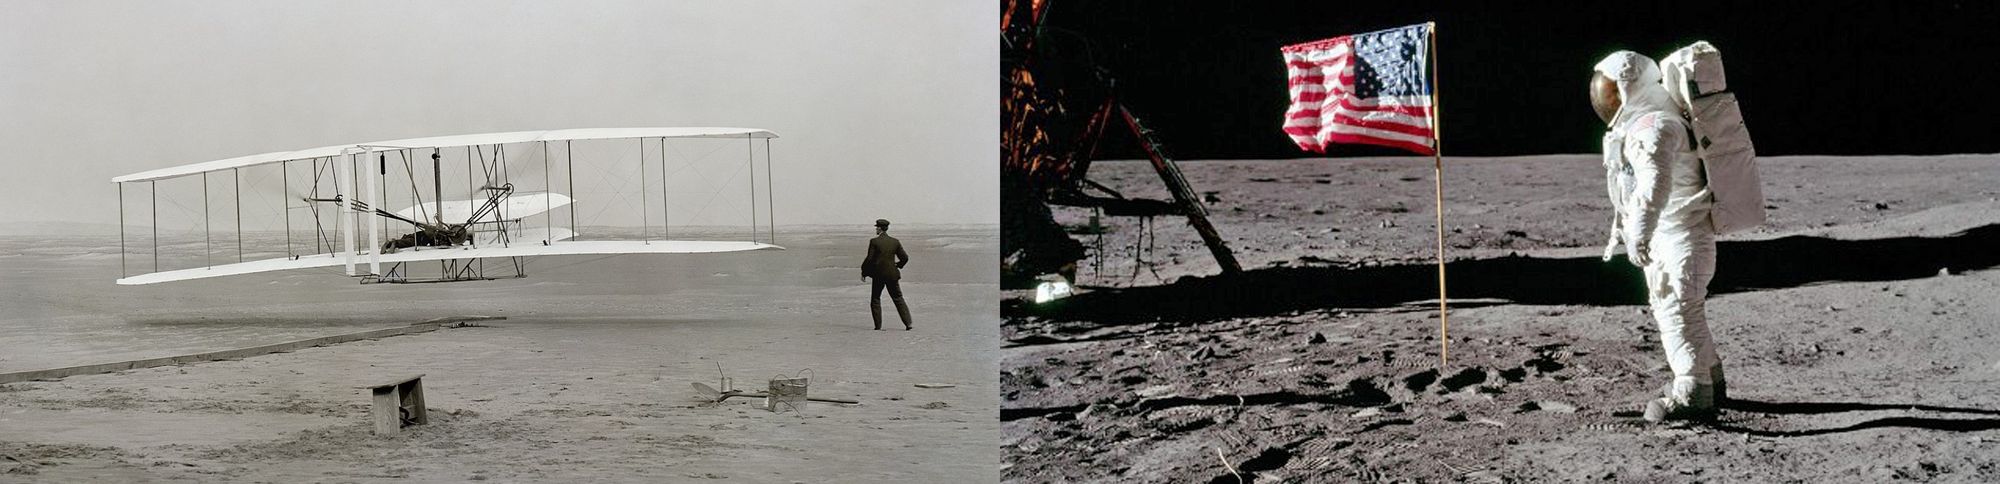 Image of the Wright brothers' first flight next to an astronaut standing by an American flag on the moon